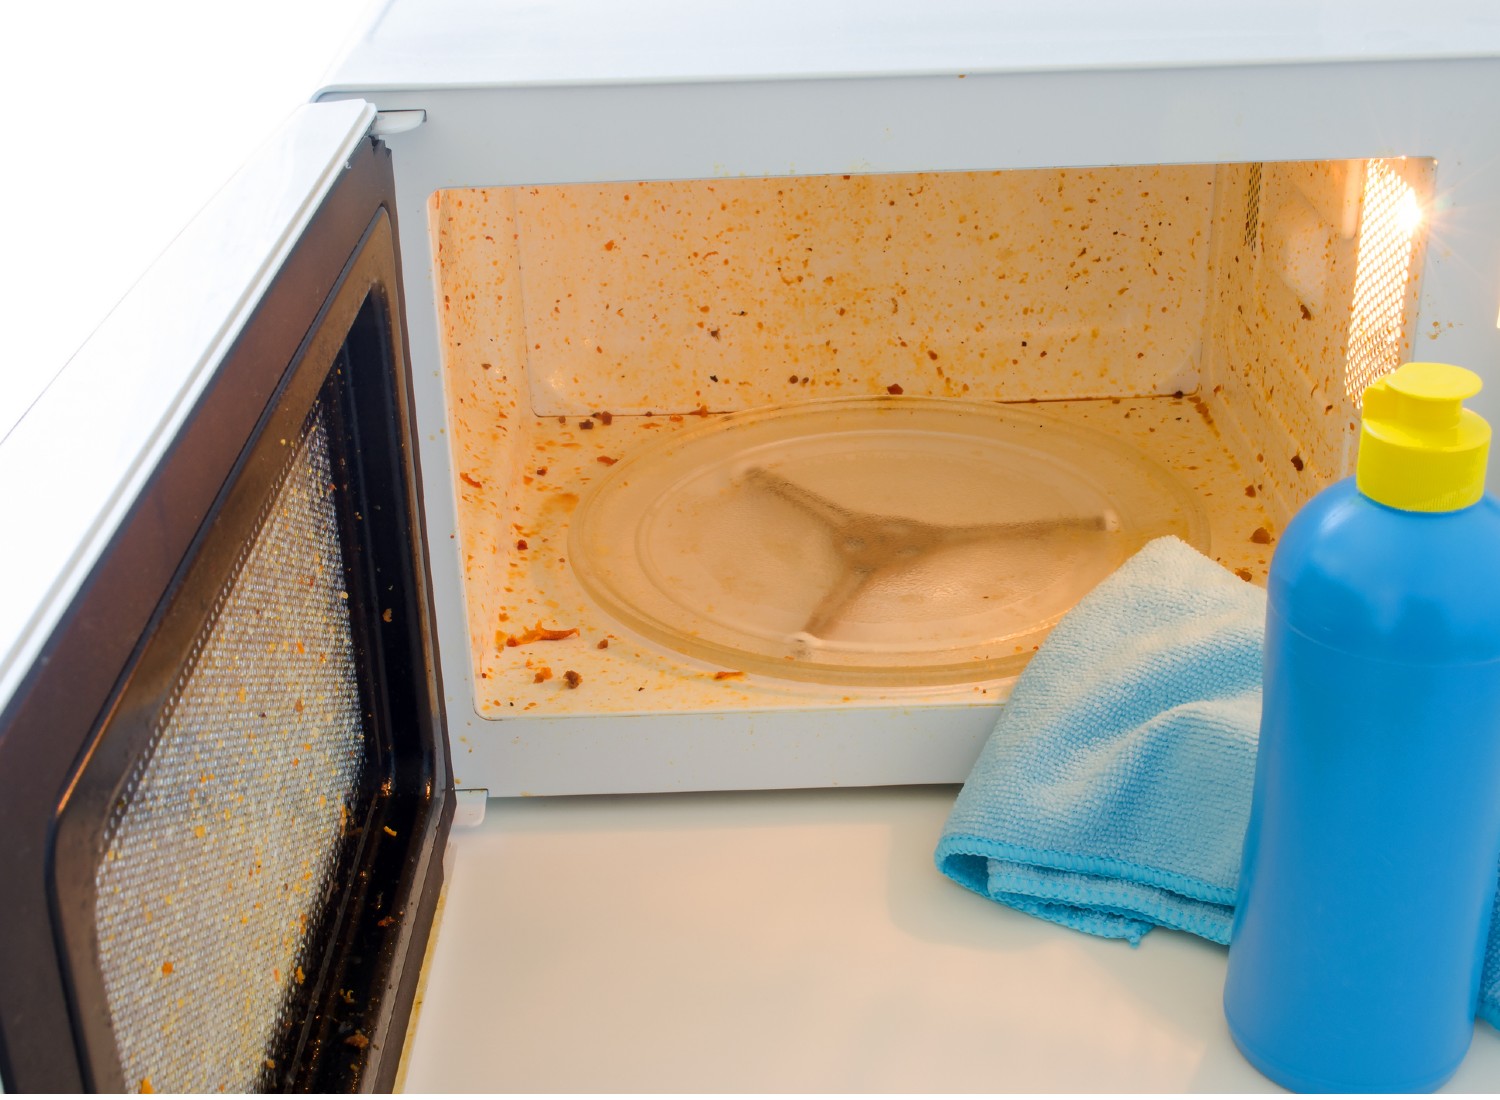 How to Clean a Microwave Oven - Consumer Reports